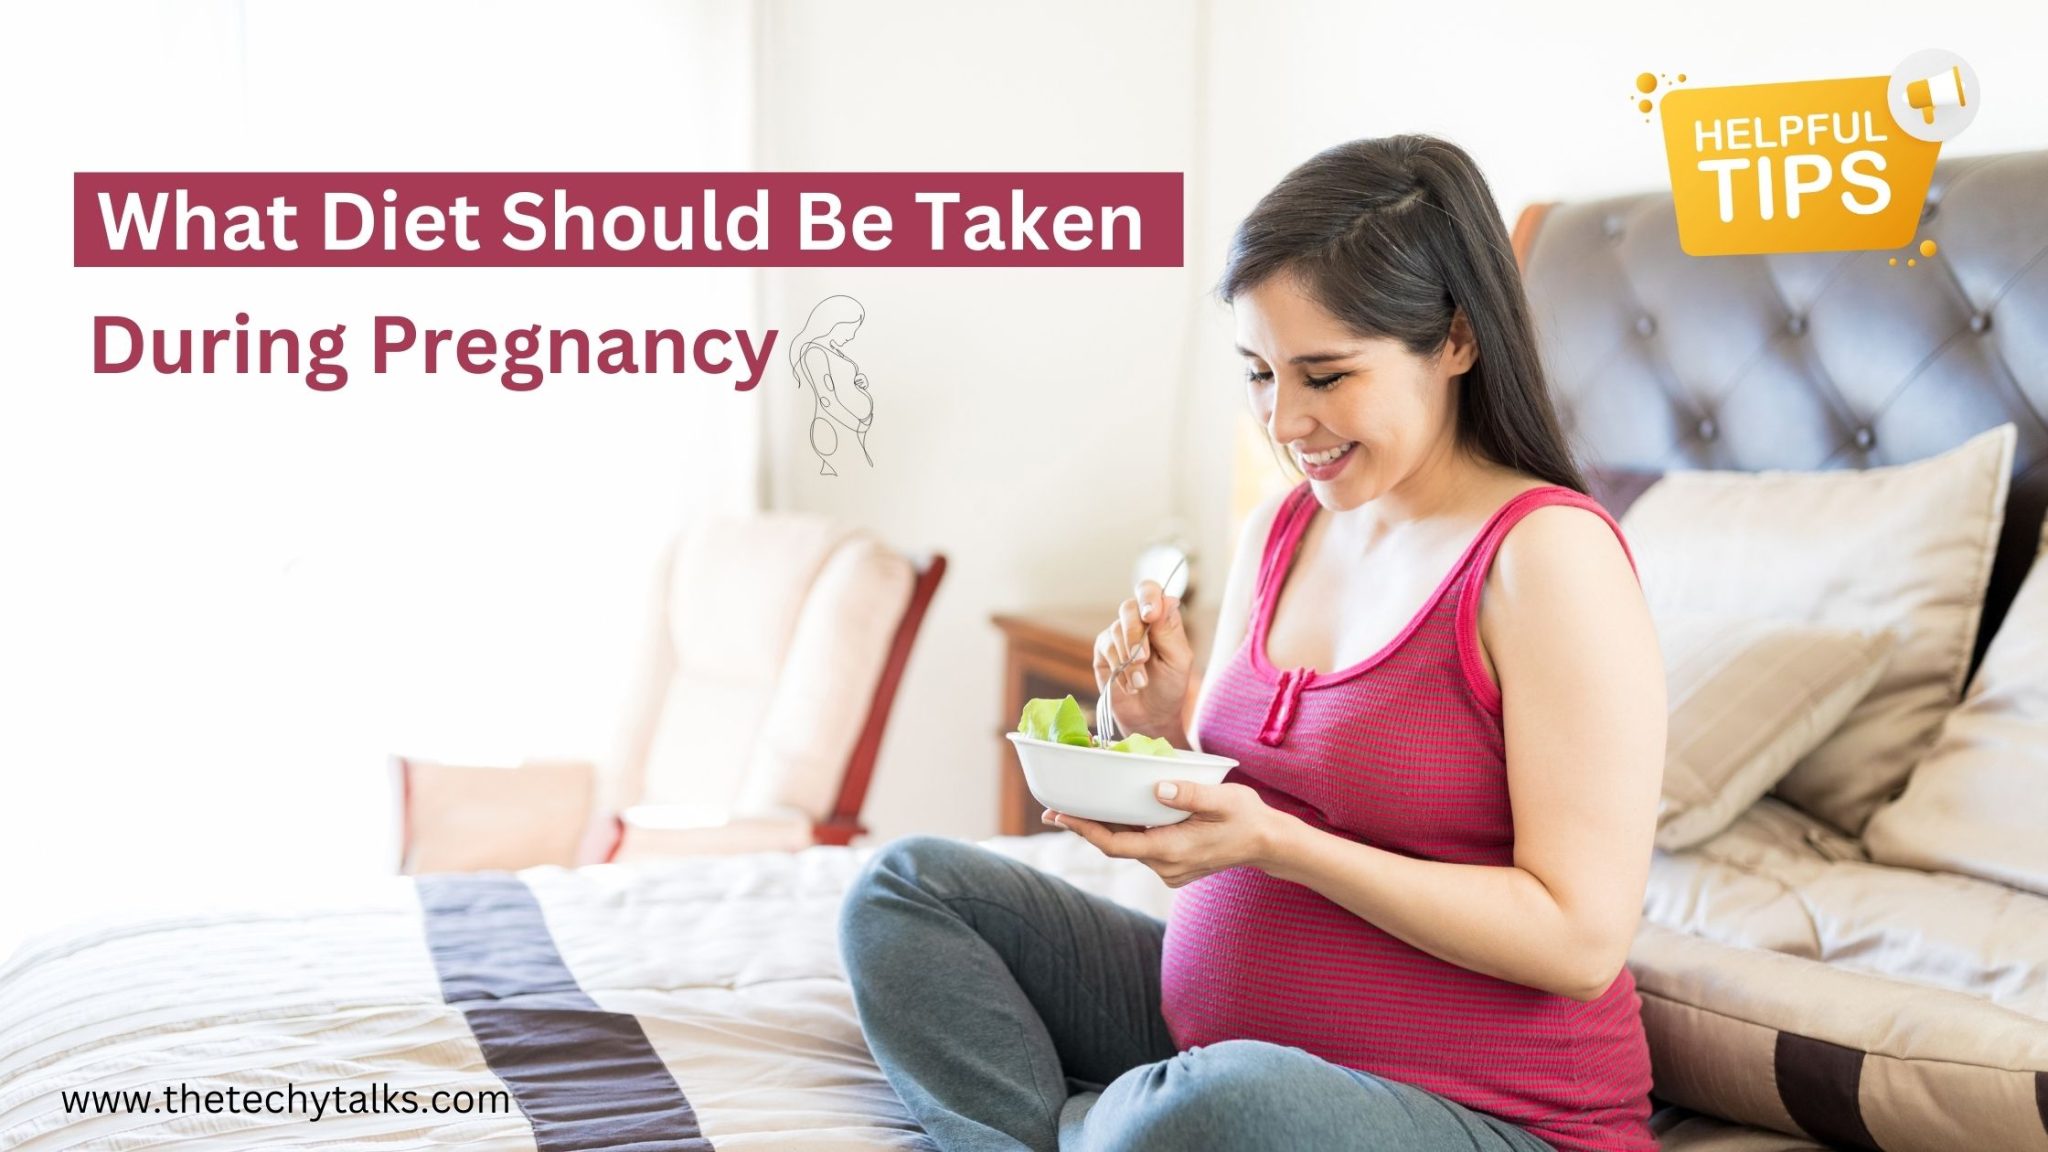 What Diet Should Be Taken During Pregnancy